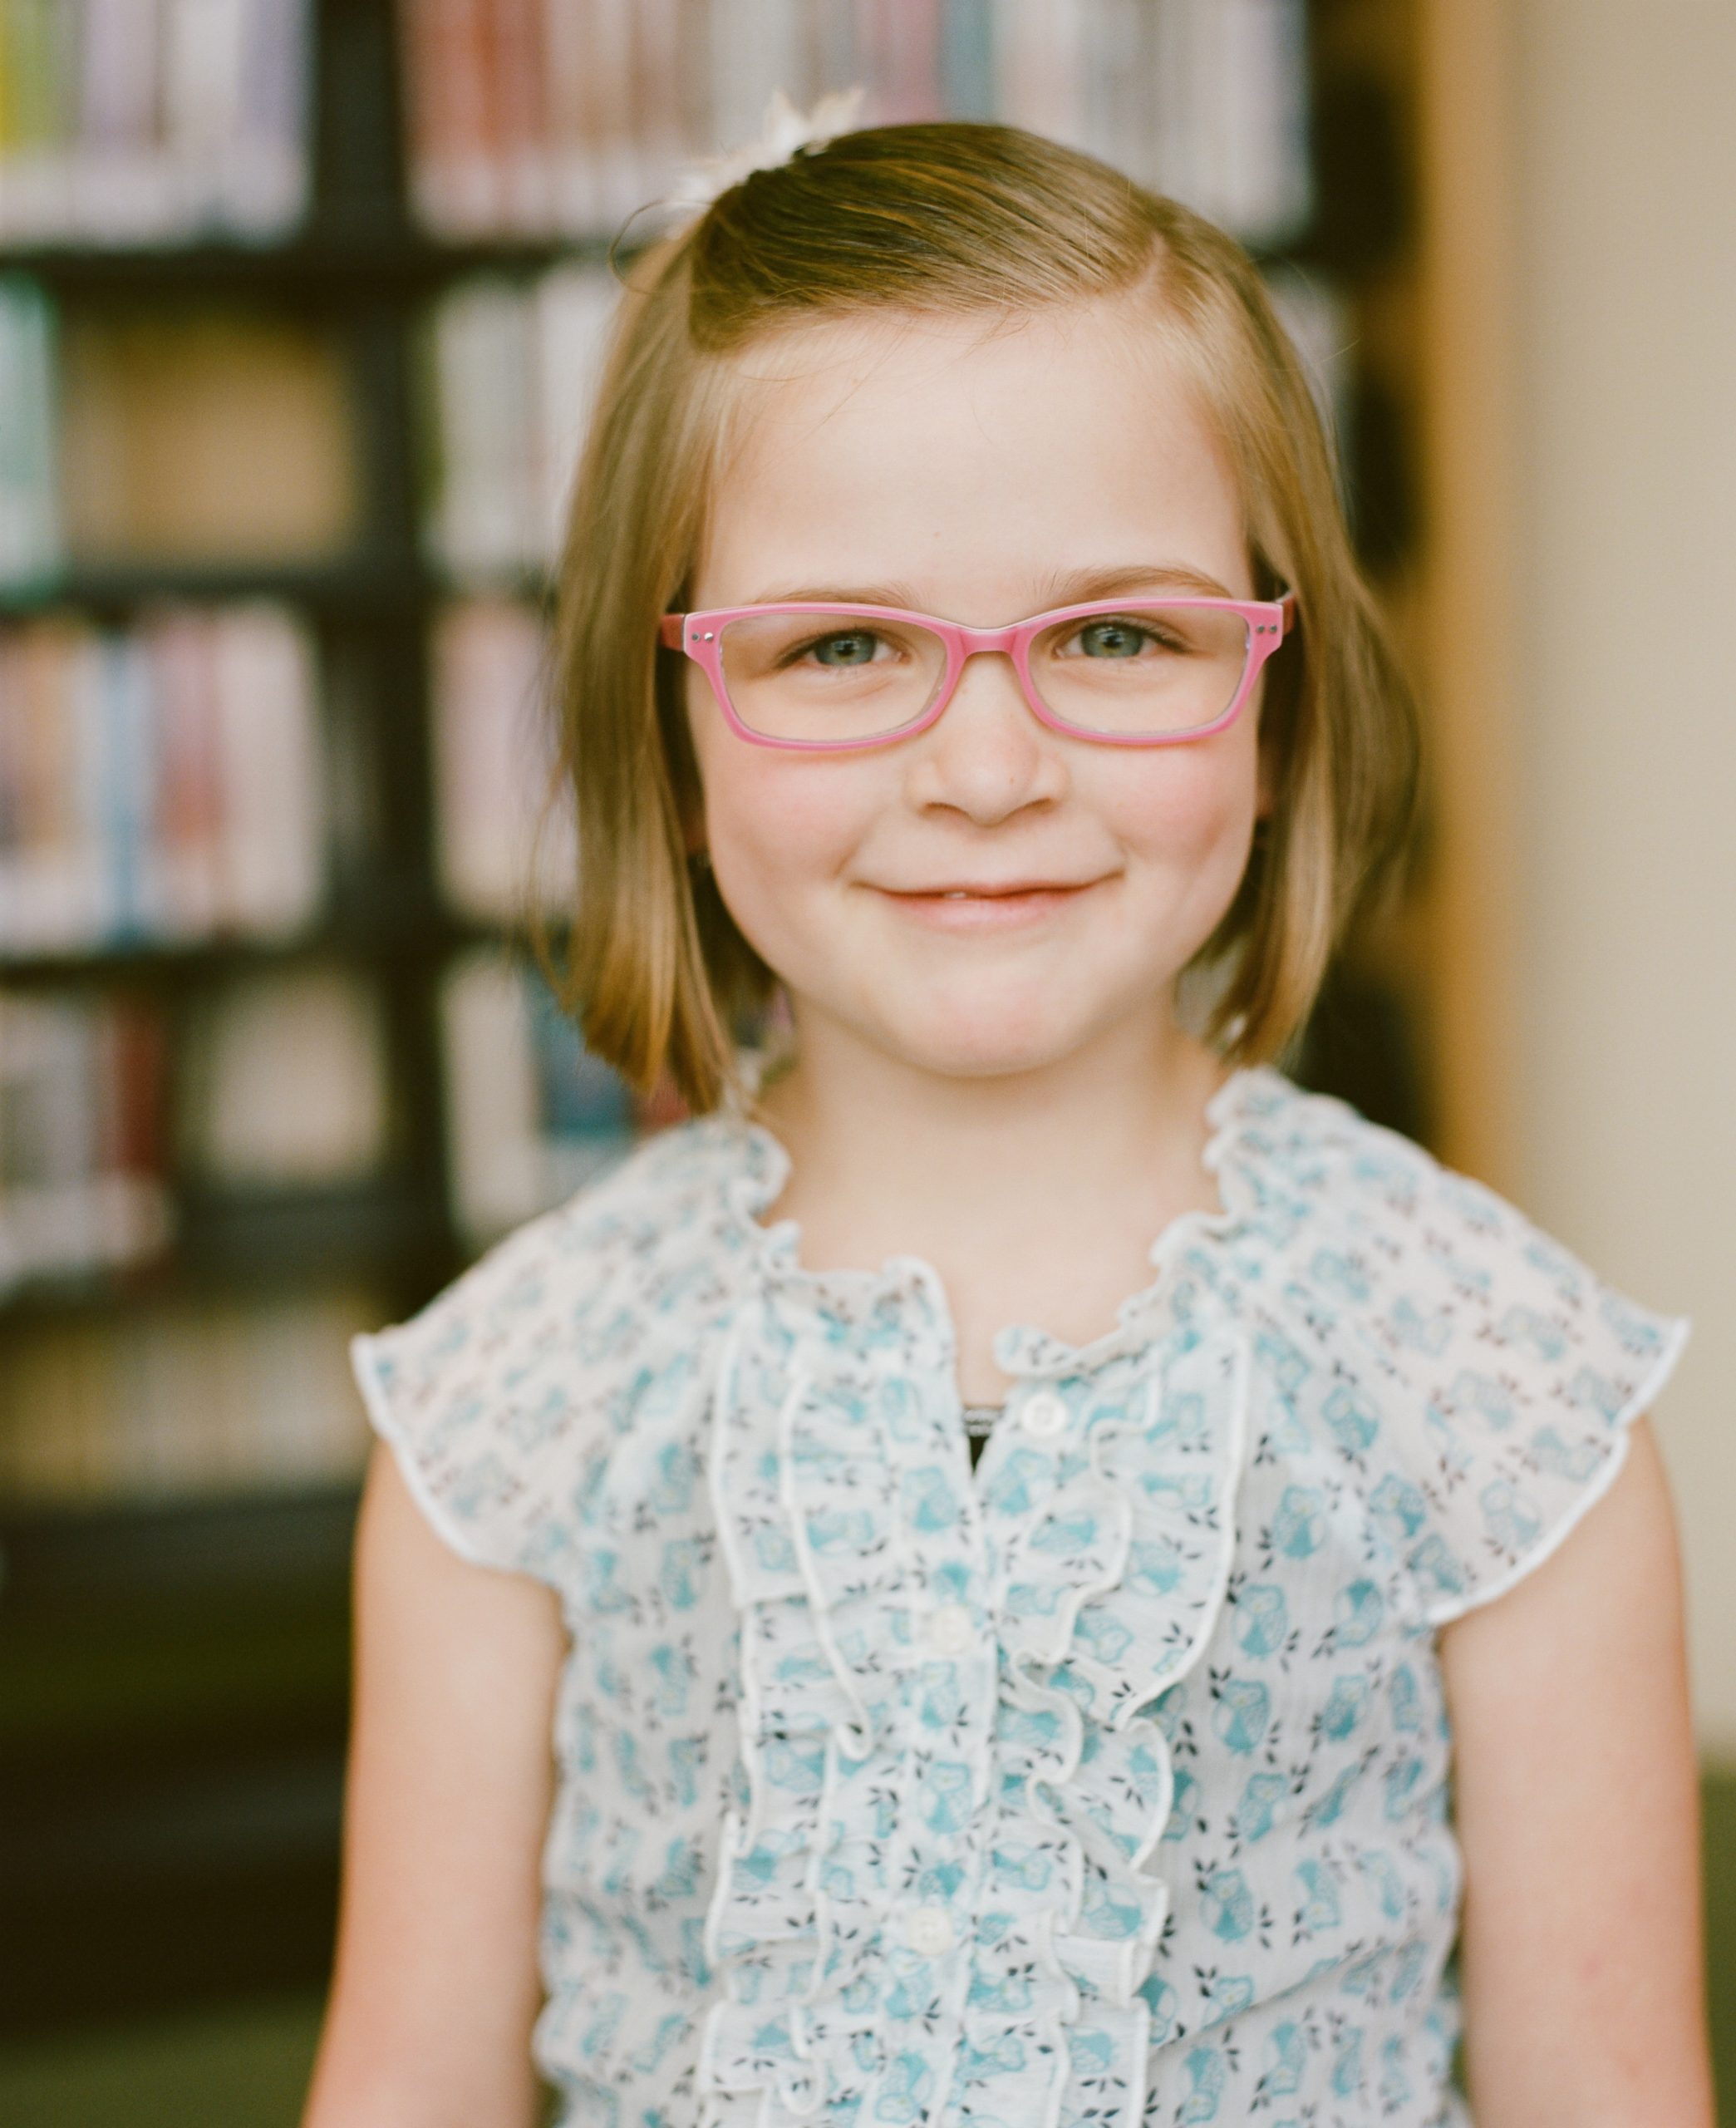 What You Need to Know About Your Child’s Vision